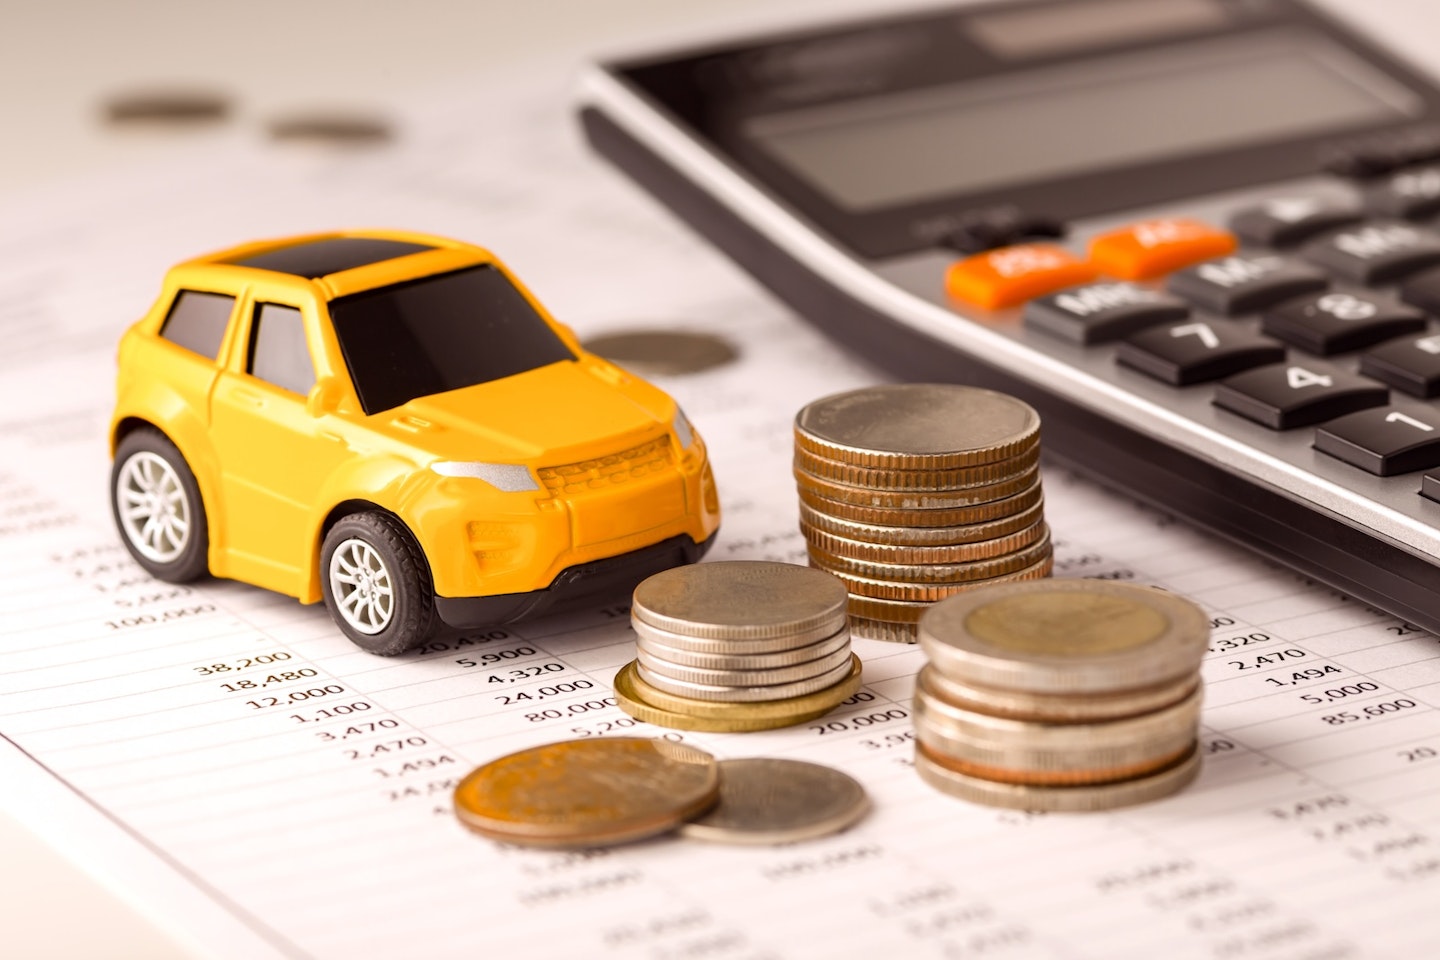 A yellow toy car next to a calculator and some stacks of coins